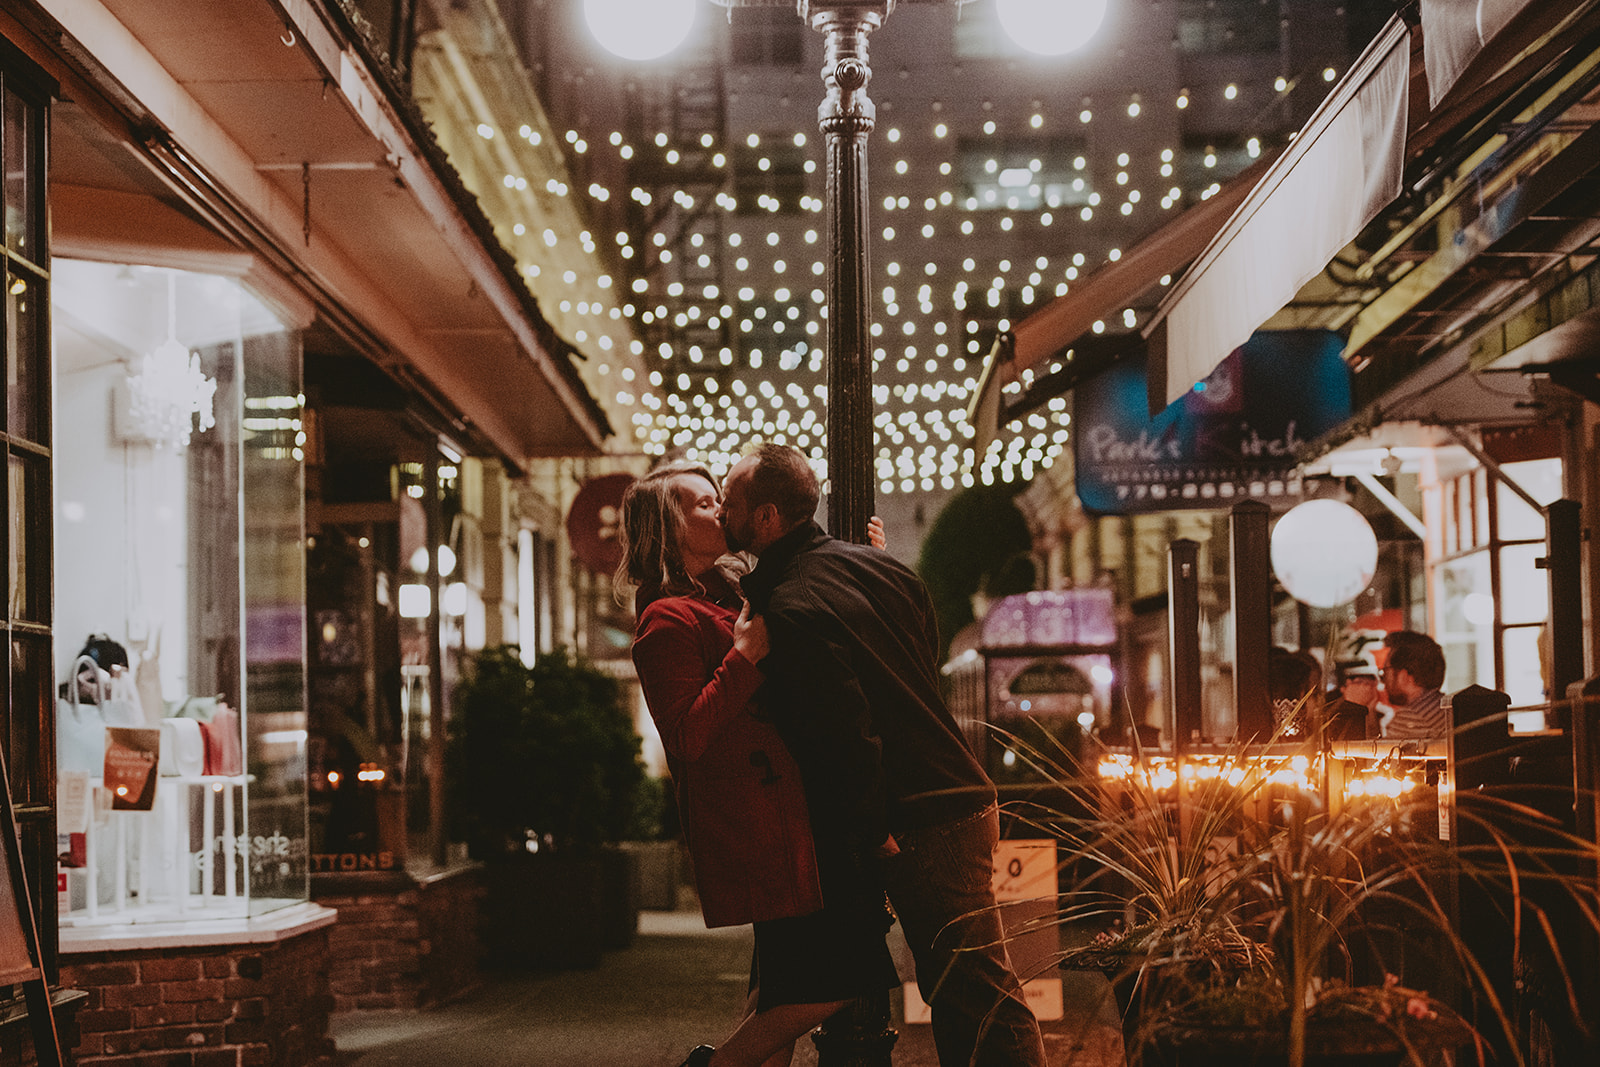 Engagement photoshoot. Couple kissing in a romantic setting in an alley